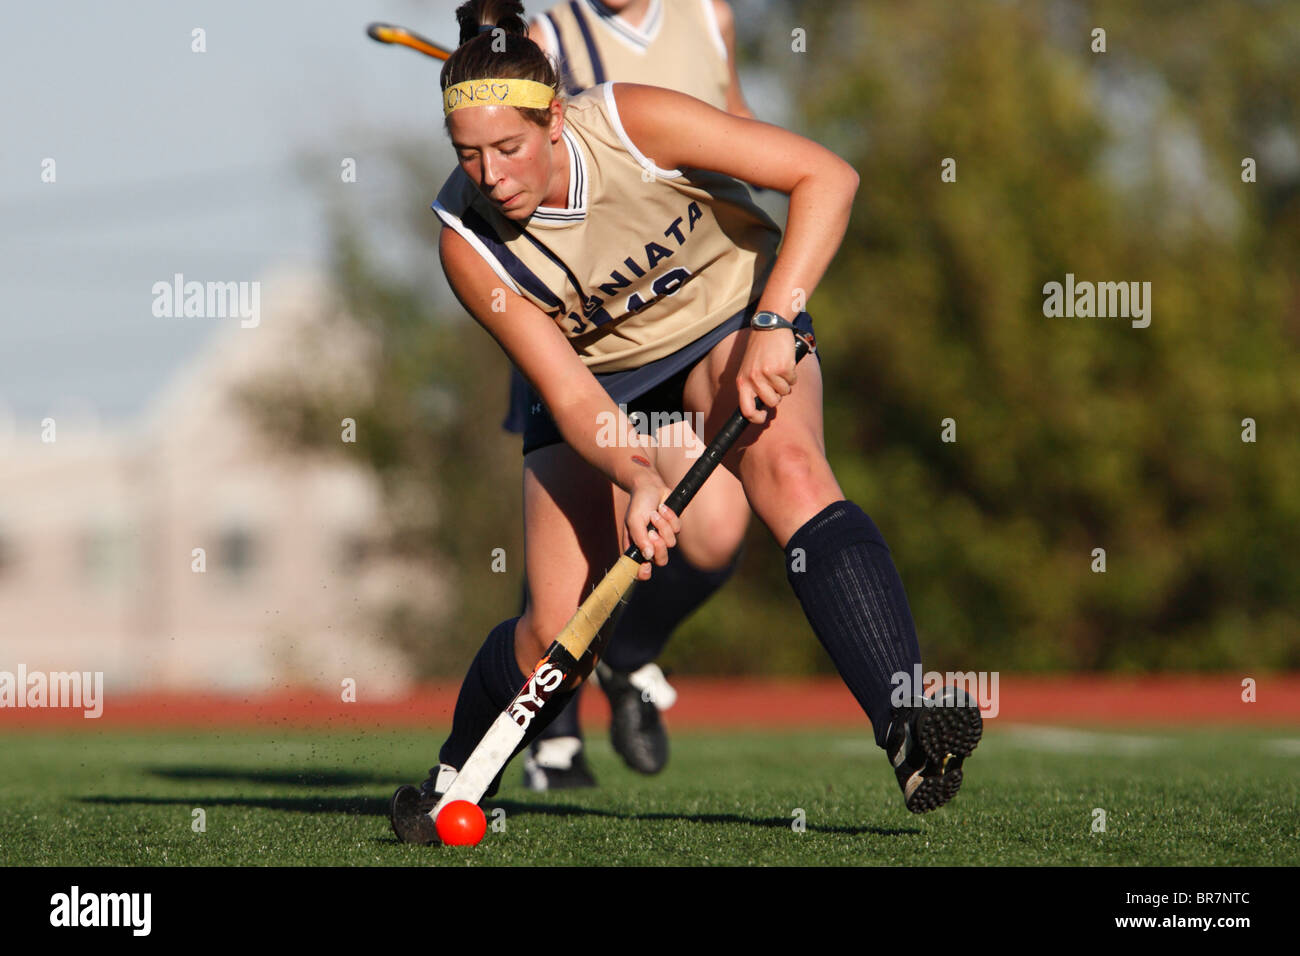 A Juniata College player controls the ball against Catholic University during the Landmark Conference field hockey championship Stock Photo